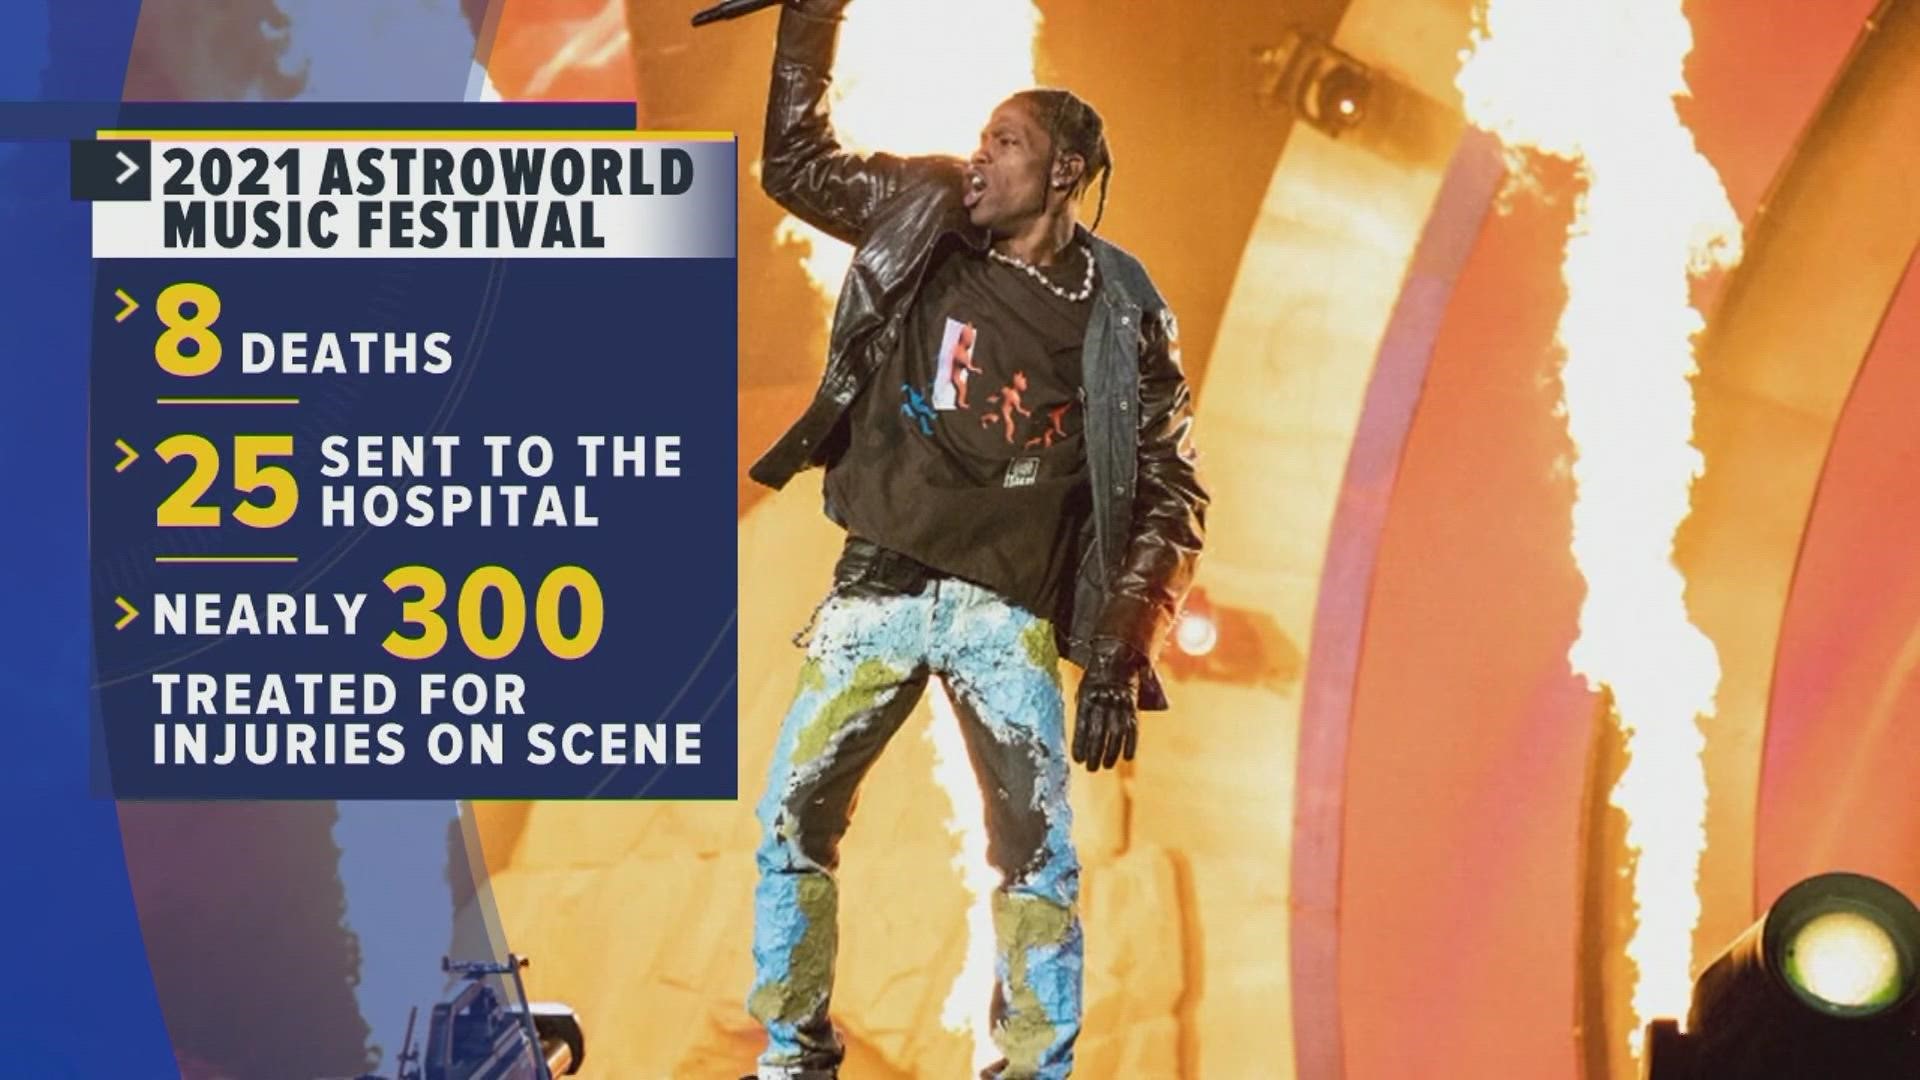 Astroworld Festival tragedy: What we know so far